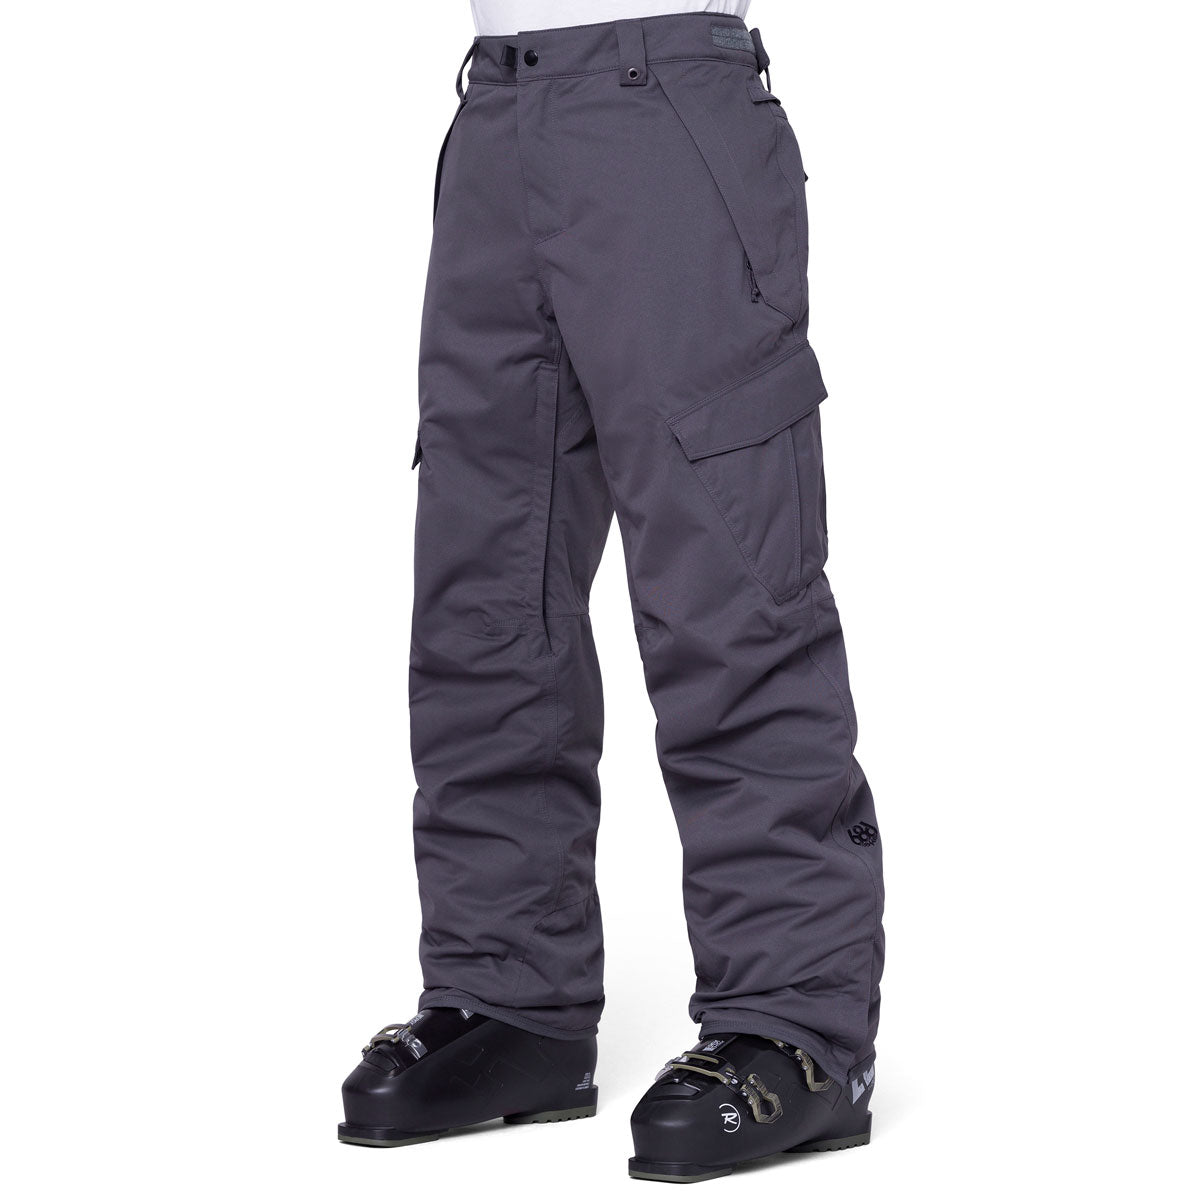 686 Infinity Insl Cargo Snowboard Pants - Charcoal image 1